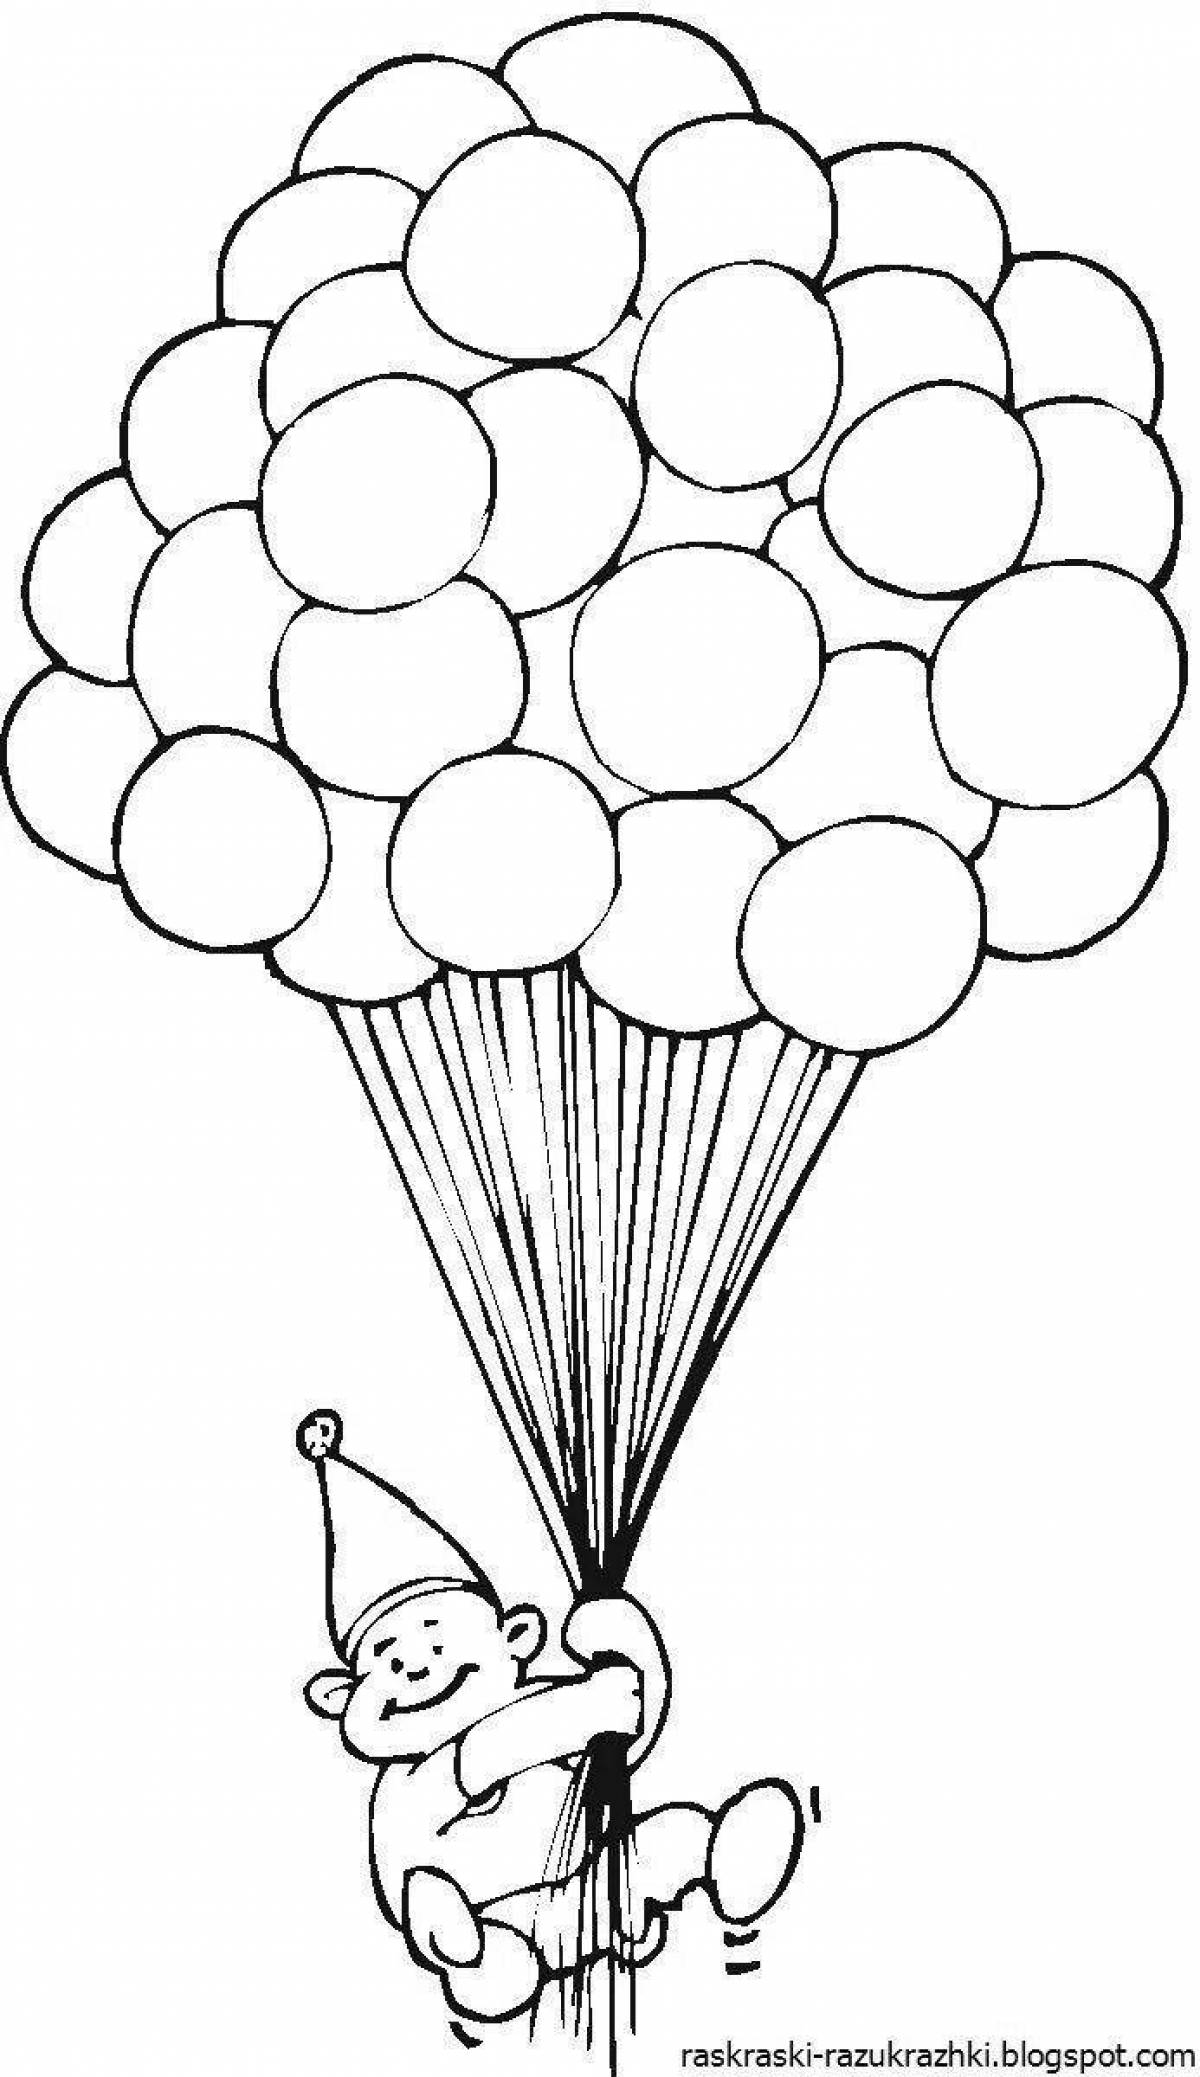 Joyful coloring page with balloons for kids